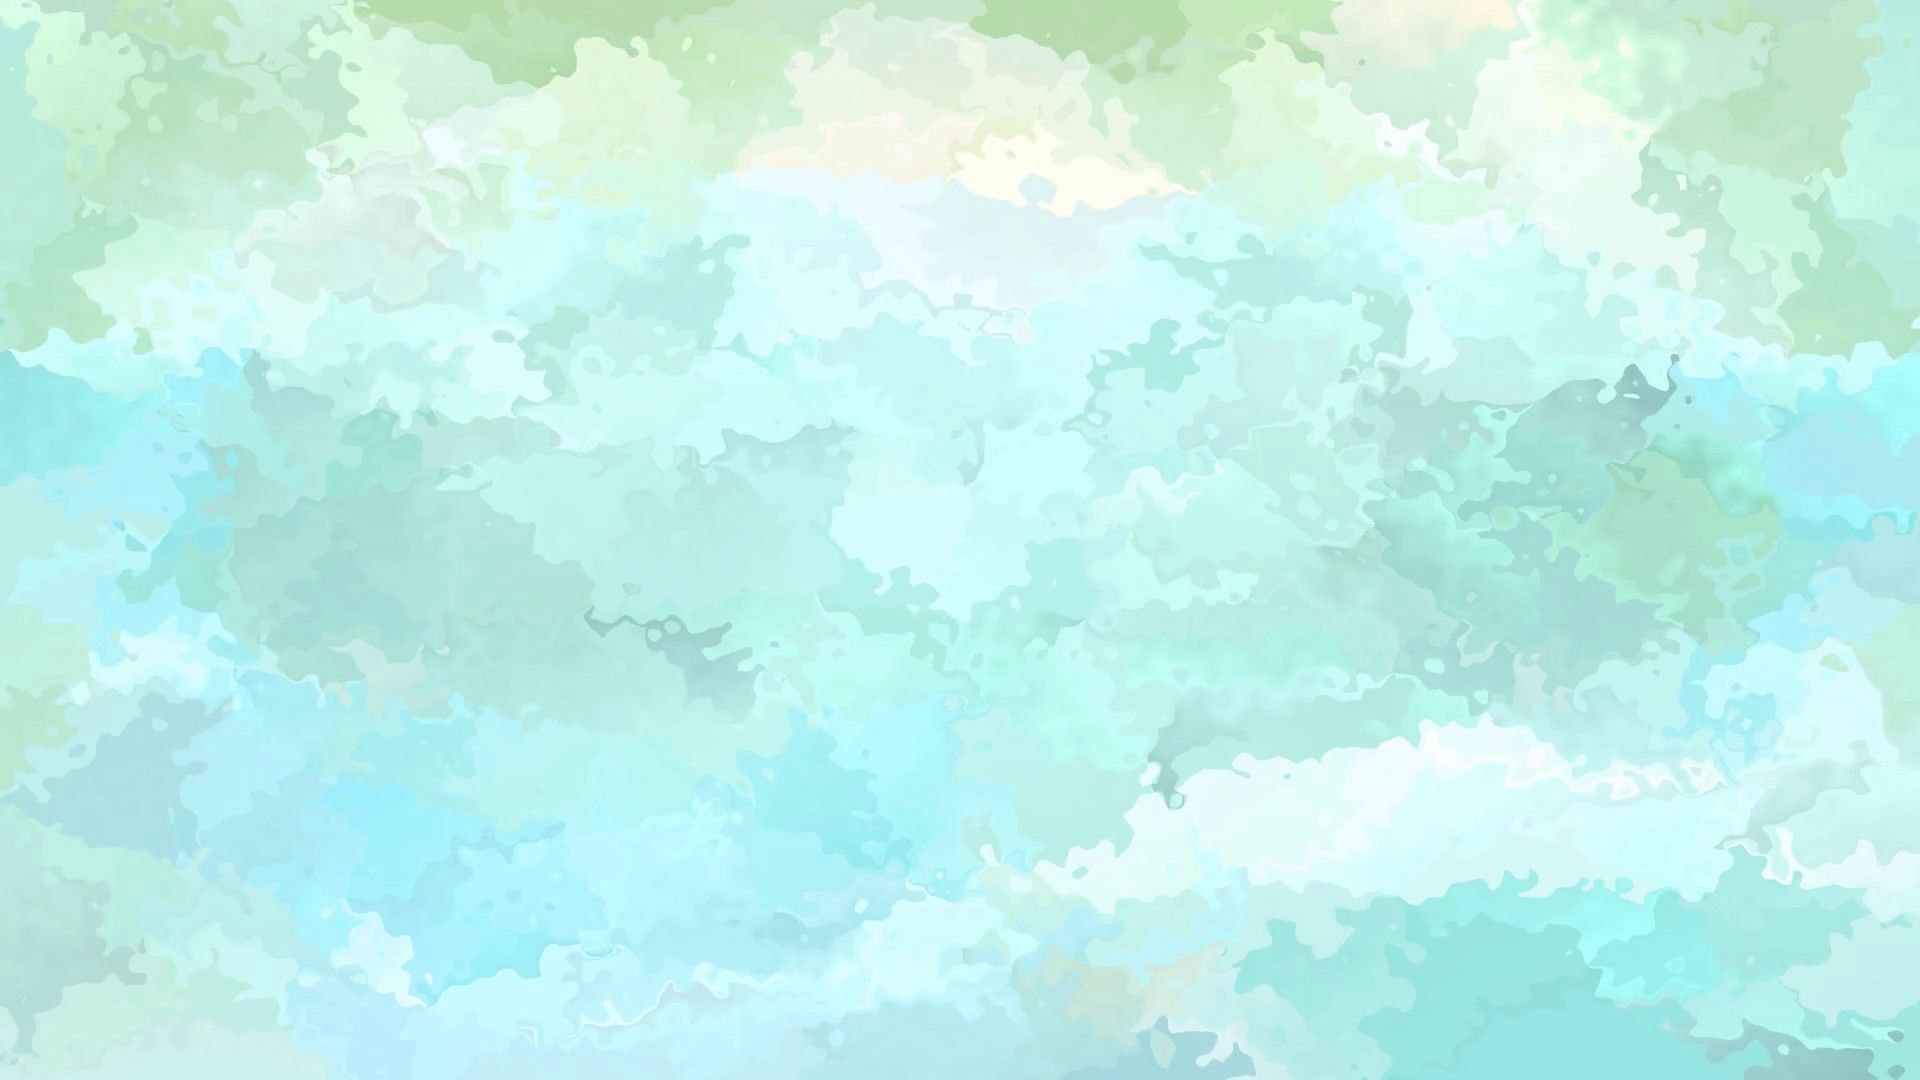 A painting of clouds and blue sky - Mint green, pastel green, turquoise